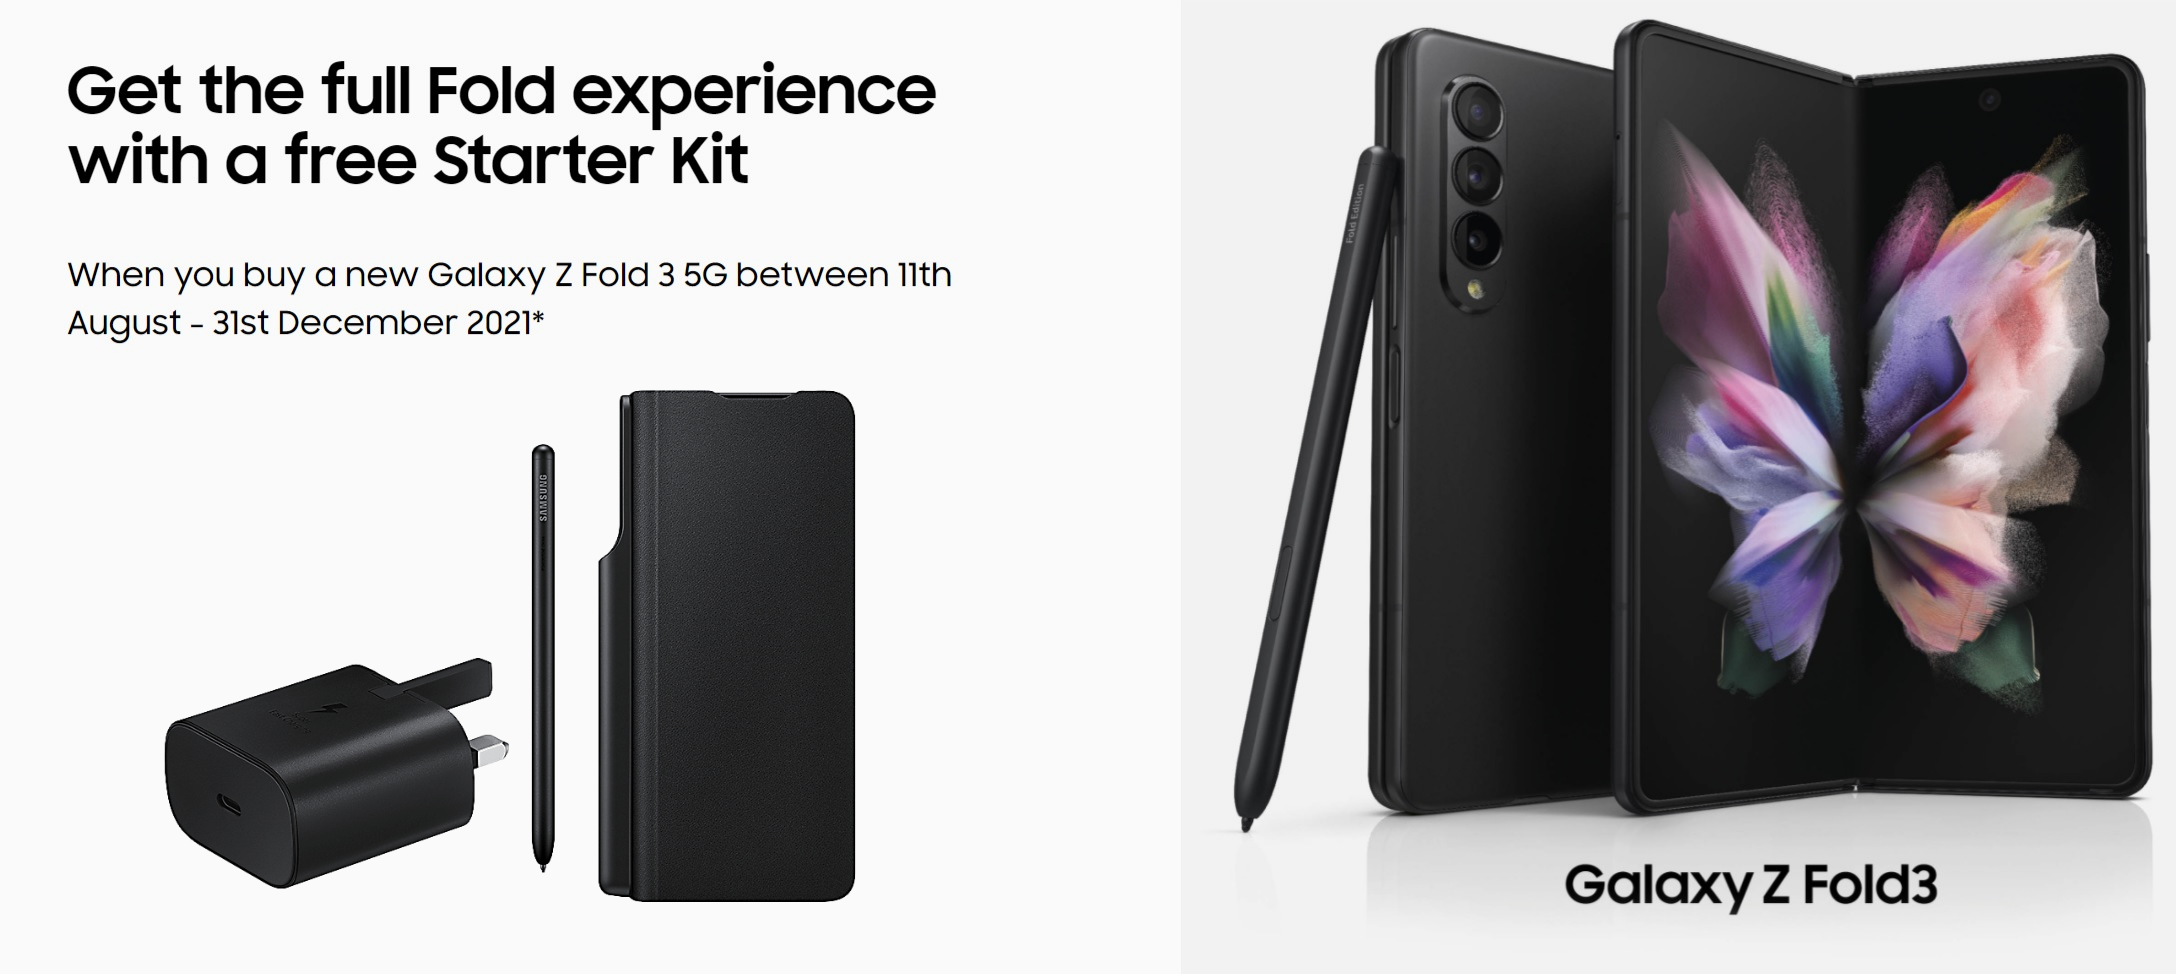 Samsung Z Fold 3 deals with Free Starter Kit including Original Flip Case, S-Pen and 25W Superfast Charger